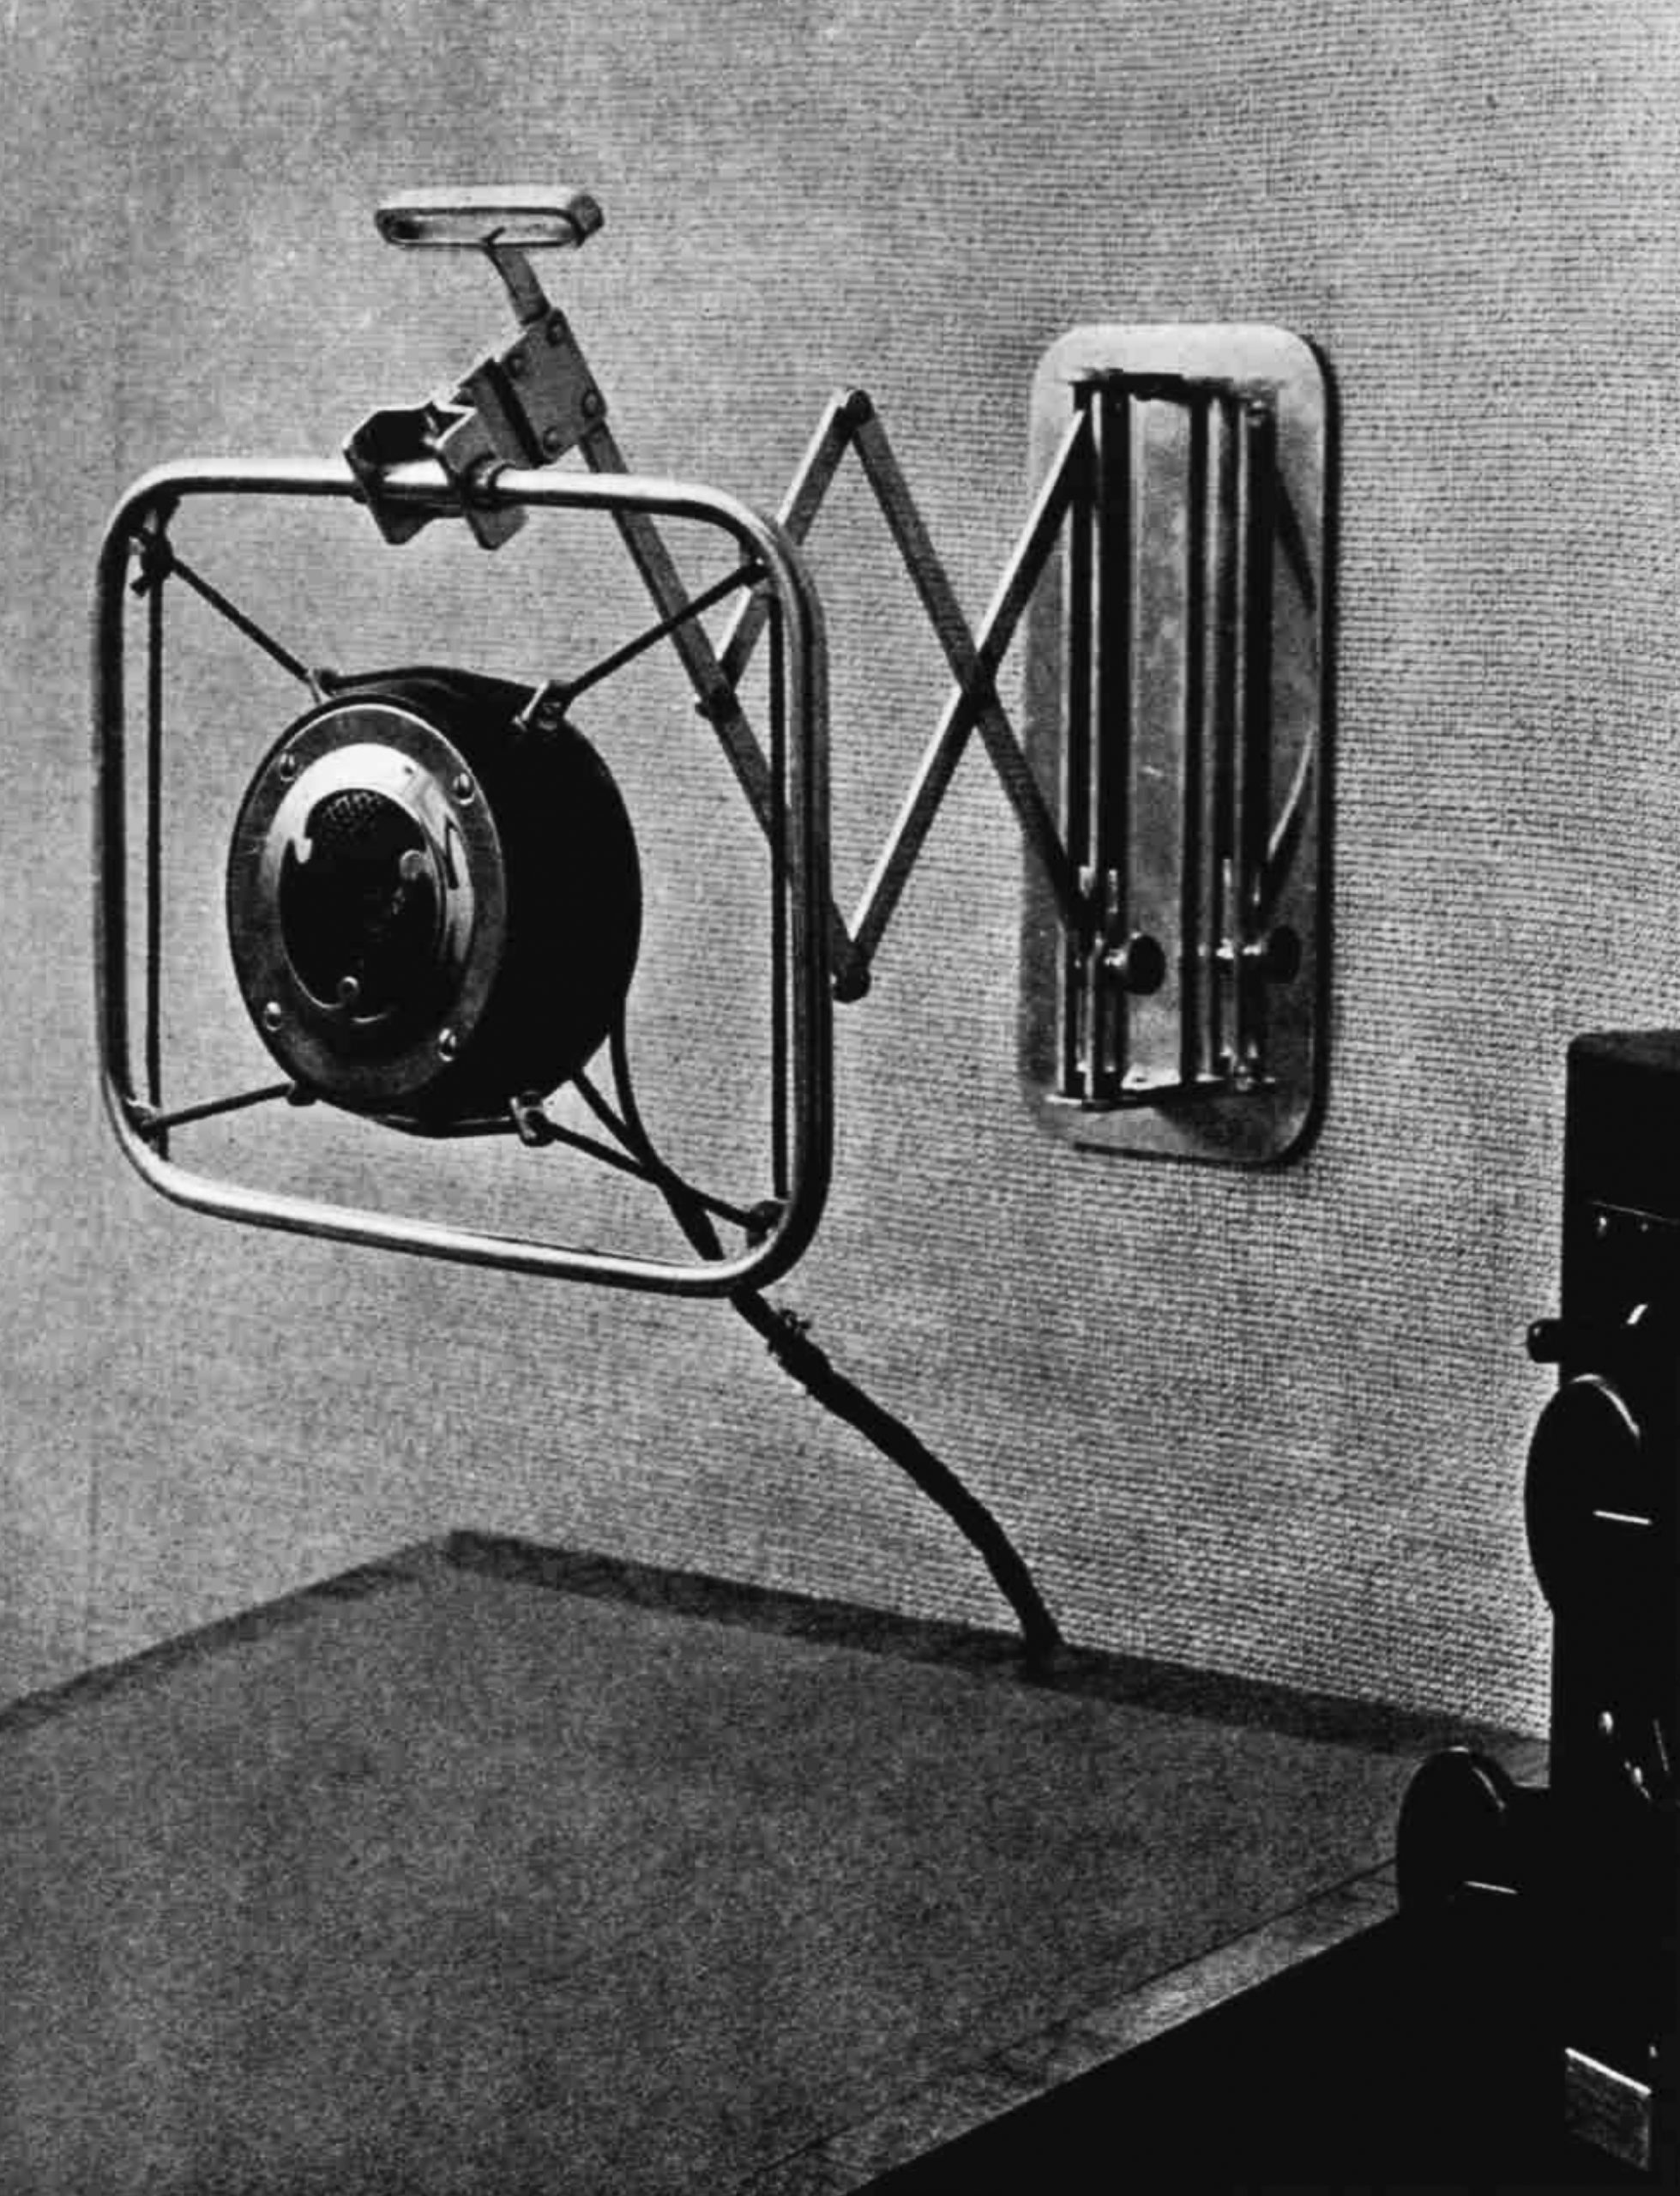 A round microphone in a square frame, bouncing from the wall on a scissor-like projection